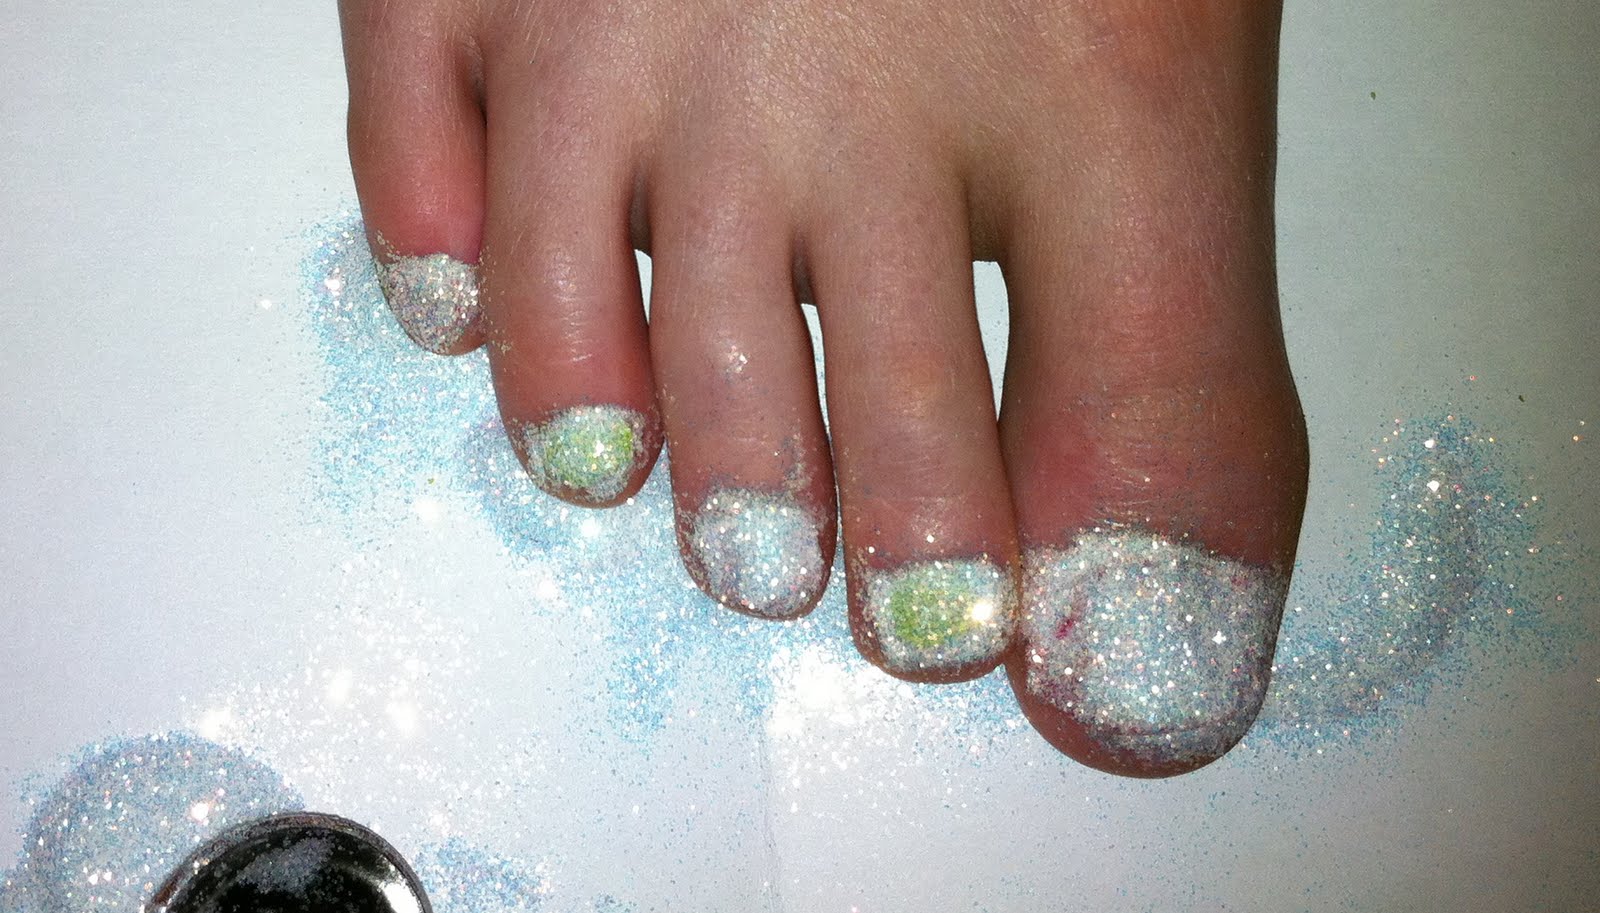 Toe Nail Designs with Glitter